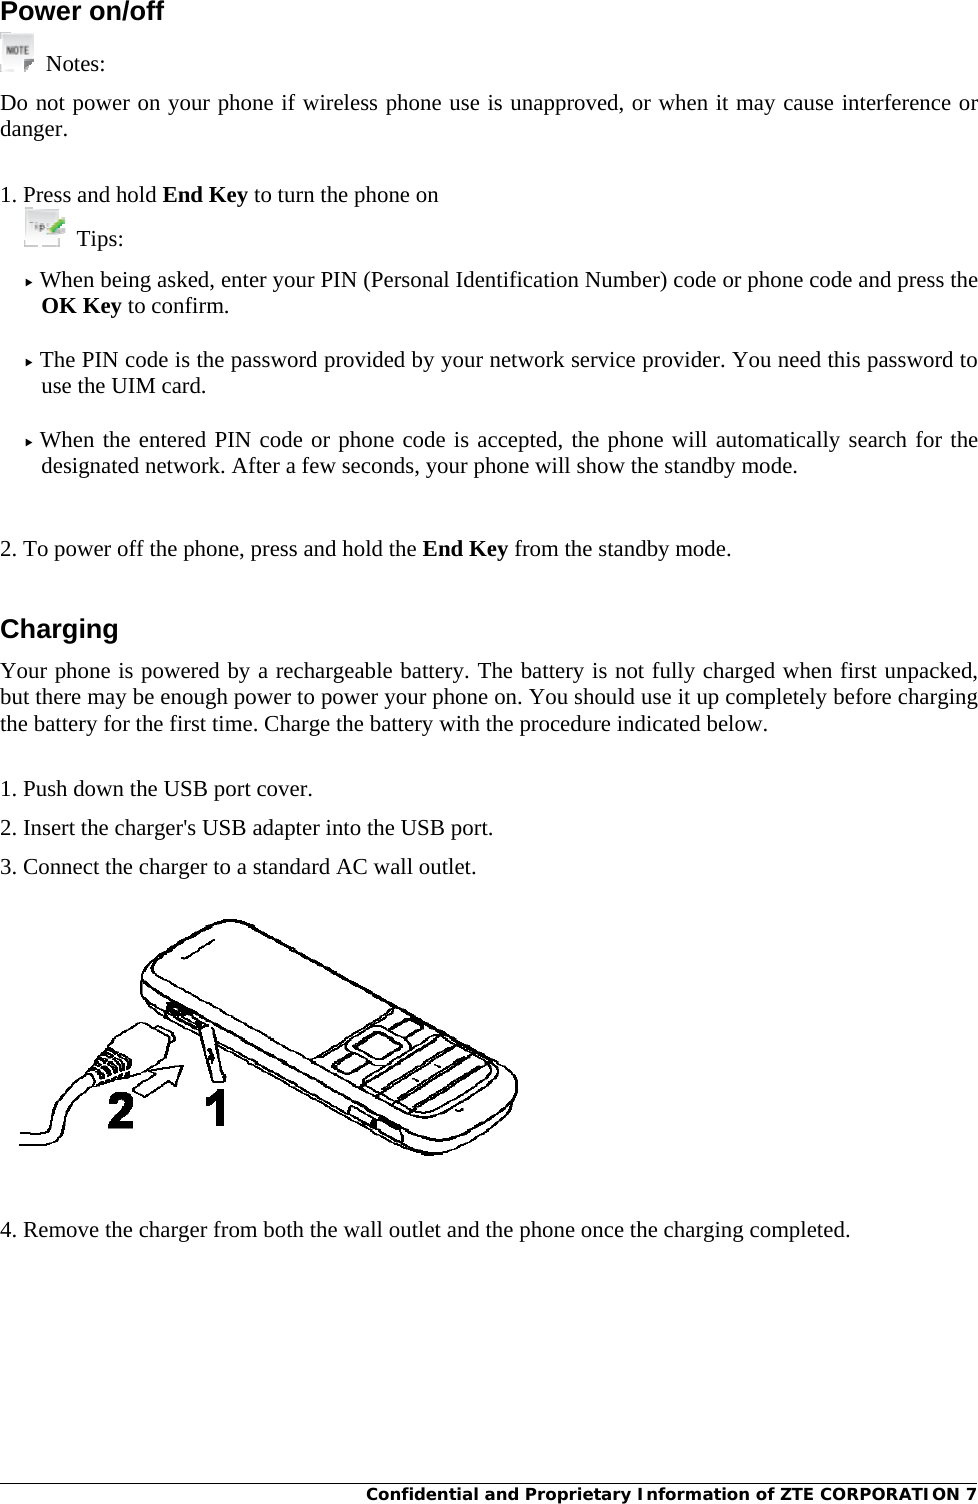 Confidential and Proprietary Information of ZTE CORPORATION 7Power on/off  Notes: Do not power on your phone if wireless phone use is unapproved, or when it may cause interference or danger.  1. Press and hold End Key to turn the phone on  Tips:  f When being asked, enter your PIN (Personal Identification Number) code or phone code and press the OK Key to confirm.  f The PIN code is the password provided by your network service provider. You need this password to use the UIM card.  f When the entered PIN code or phone code is accepted, the phone will automatically search for the designated network. After a few seconds, your phone will show the standby mode.    2. To power off the phone, press and hold the End Key from the standby mode.  Charging Your phone is powered by a rechargeable battery. The battery is not fully charged when first unpacked, but there may be enough power to power your phone on. You should use it up completely before charging the battery for the first time. Charge the battery with the procedure indicated below.  1. Push down the USB port cover. 2. Insert the charger&apos;s USB adapter into the USB port. 3. Connect the charger to a standard AC wall outlet.   4. Remove the charger from both the wall outlet and the phone once the charging completed.  